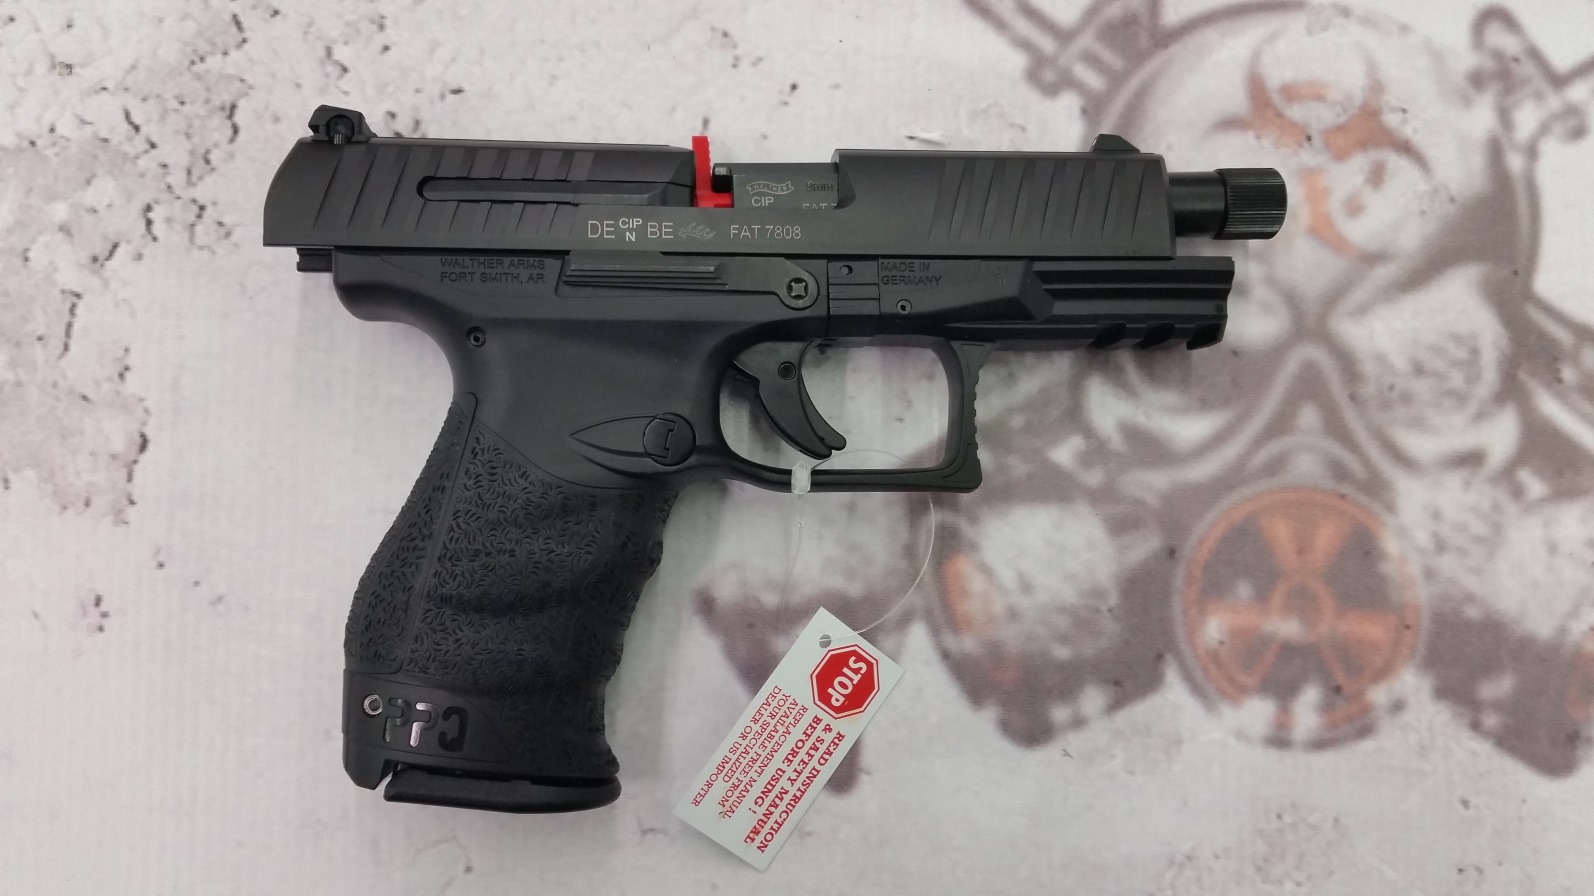 walther serial numbers ppq